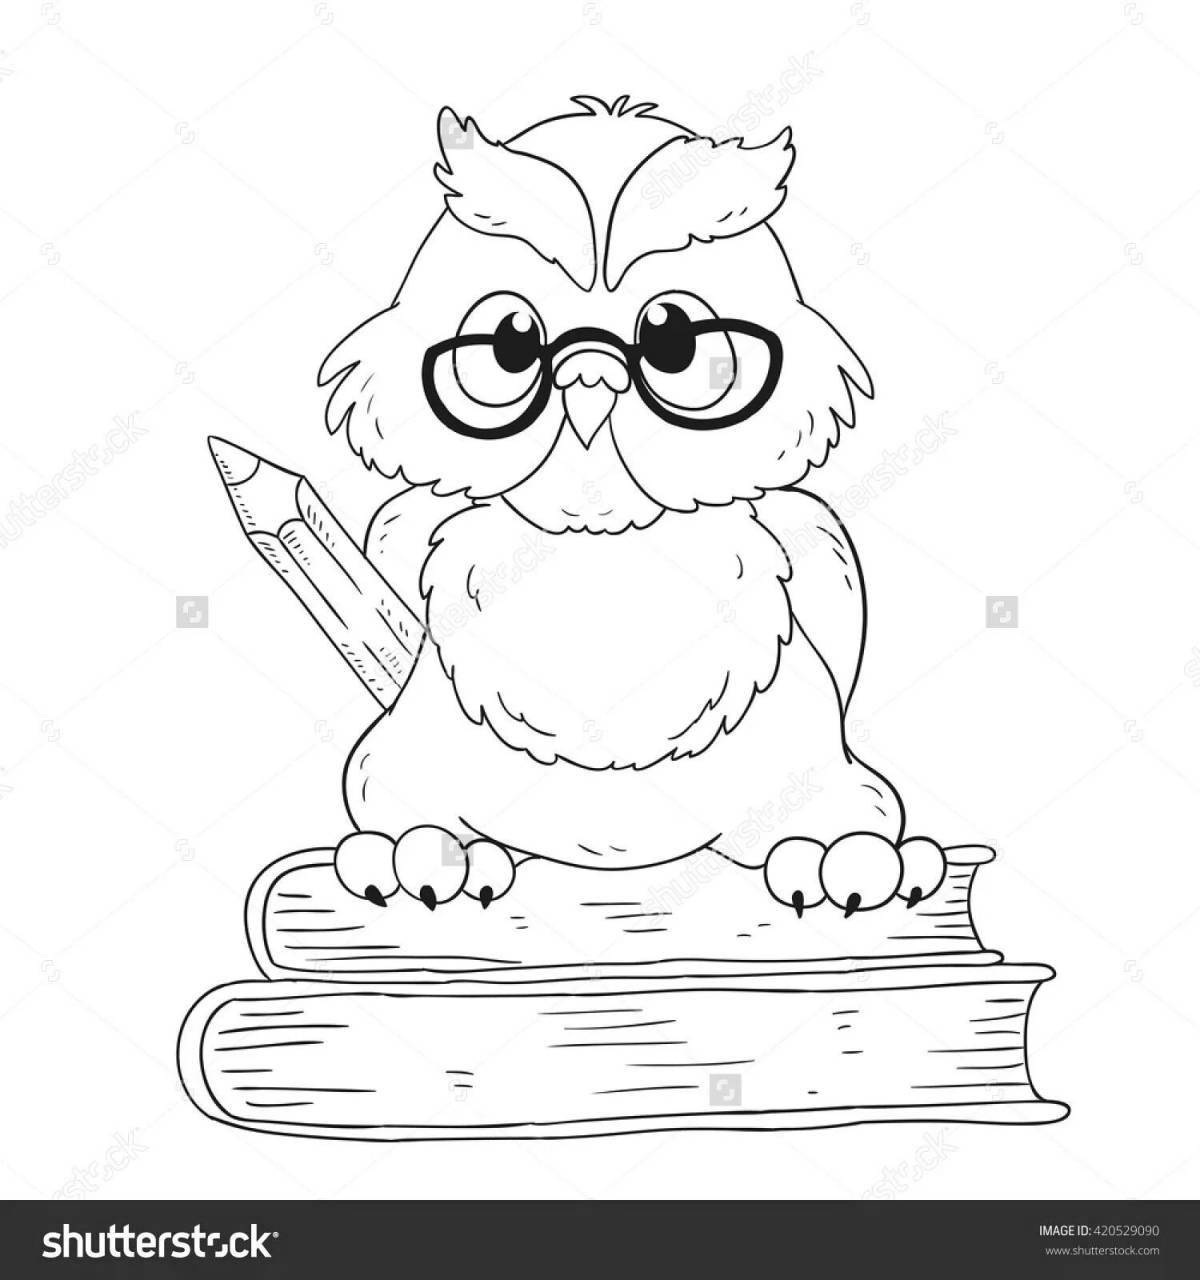 Adorable smart owl coloring page for kids